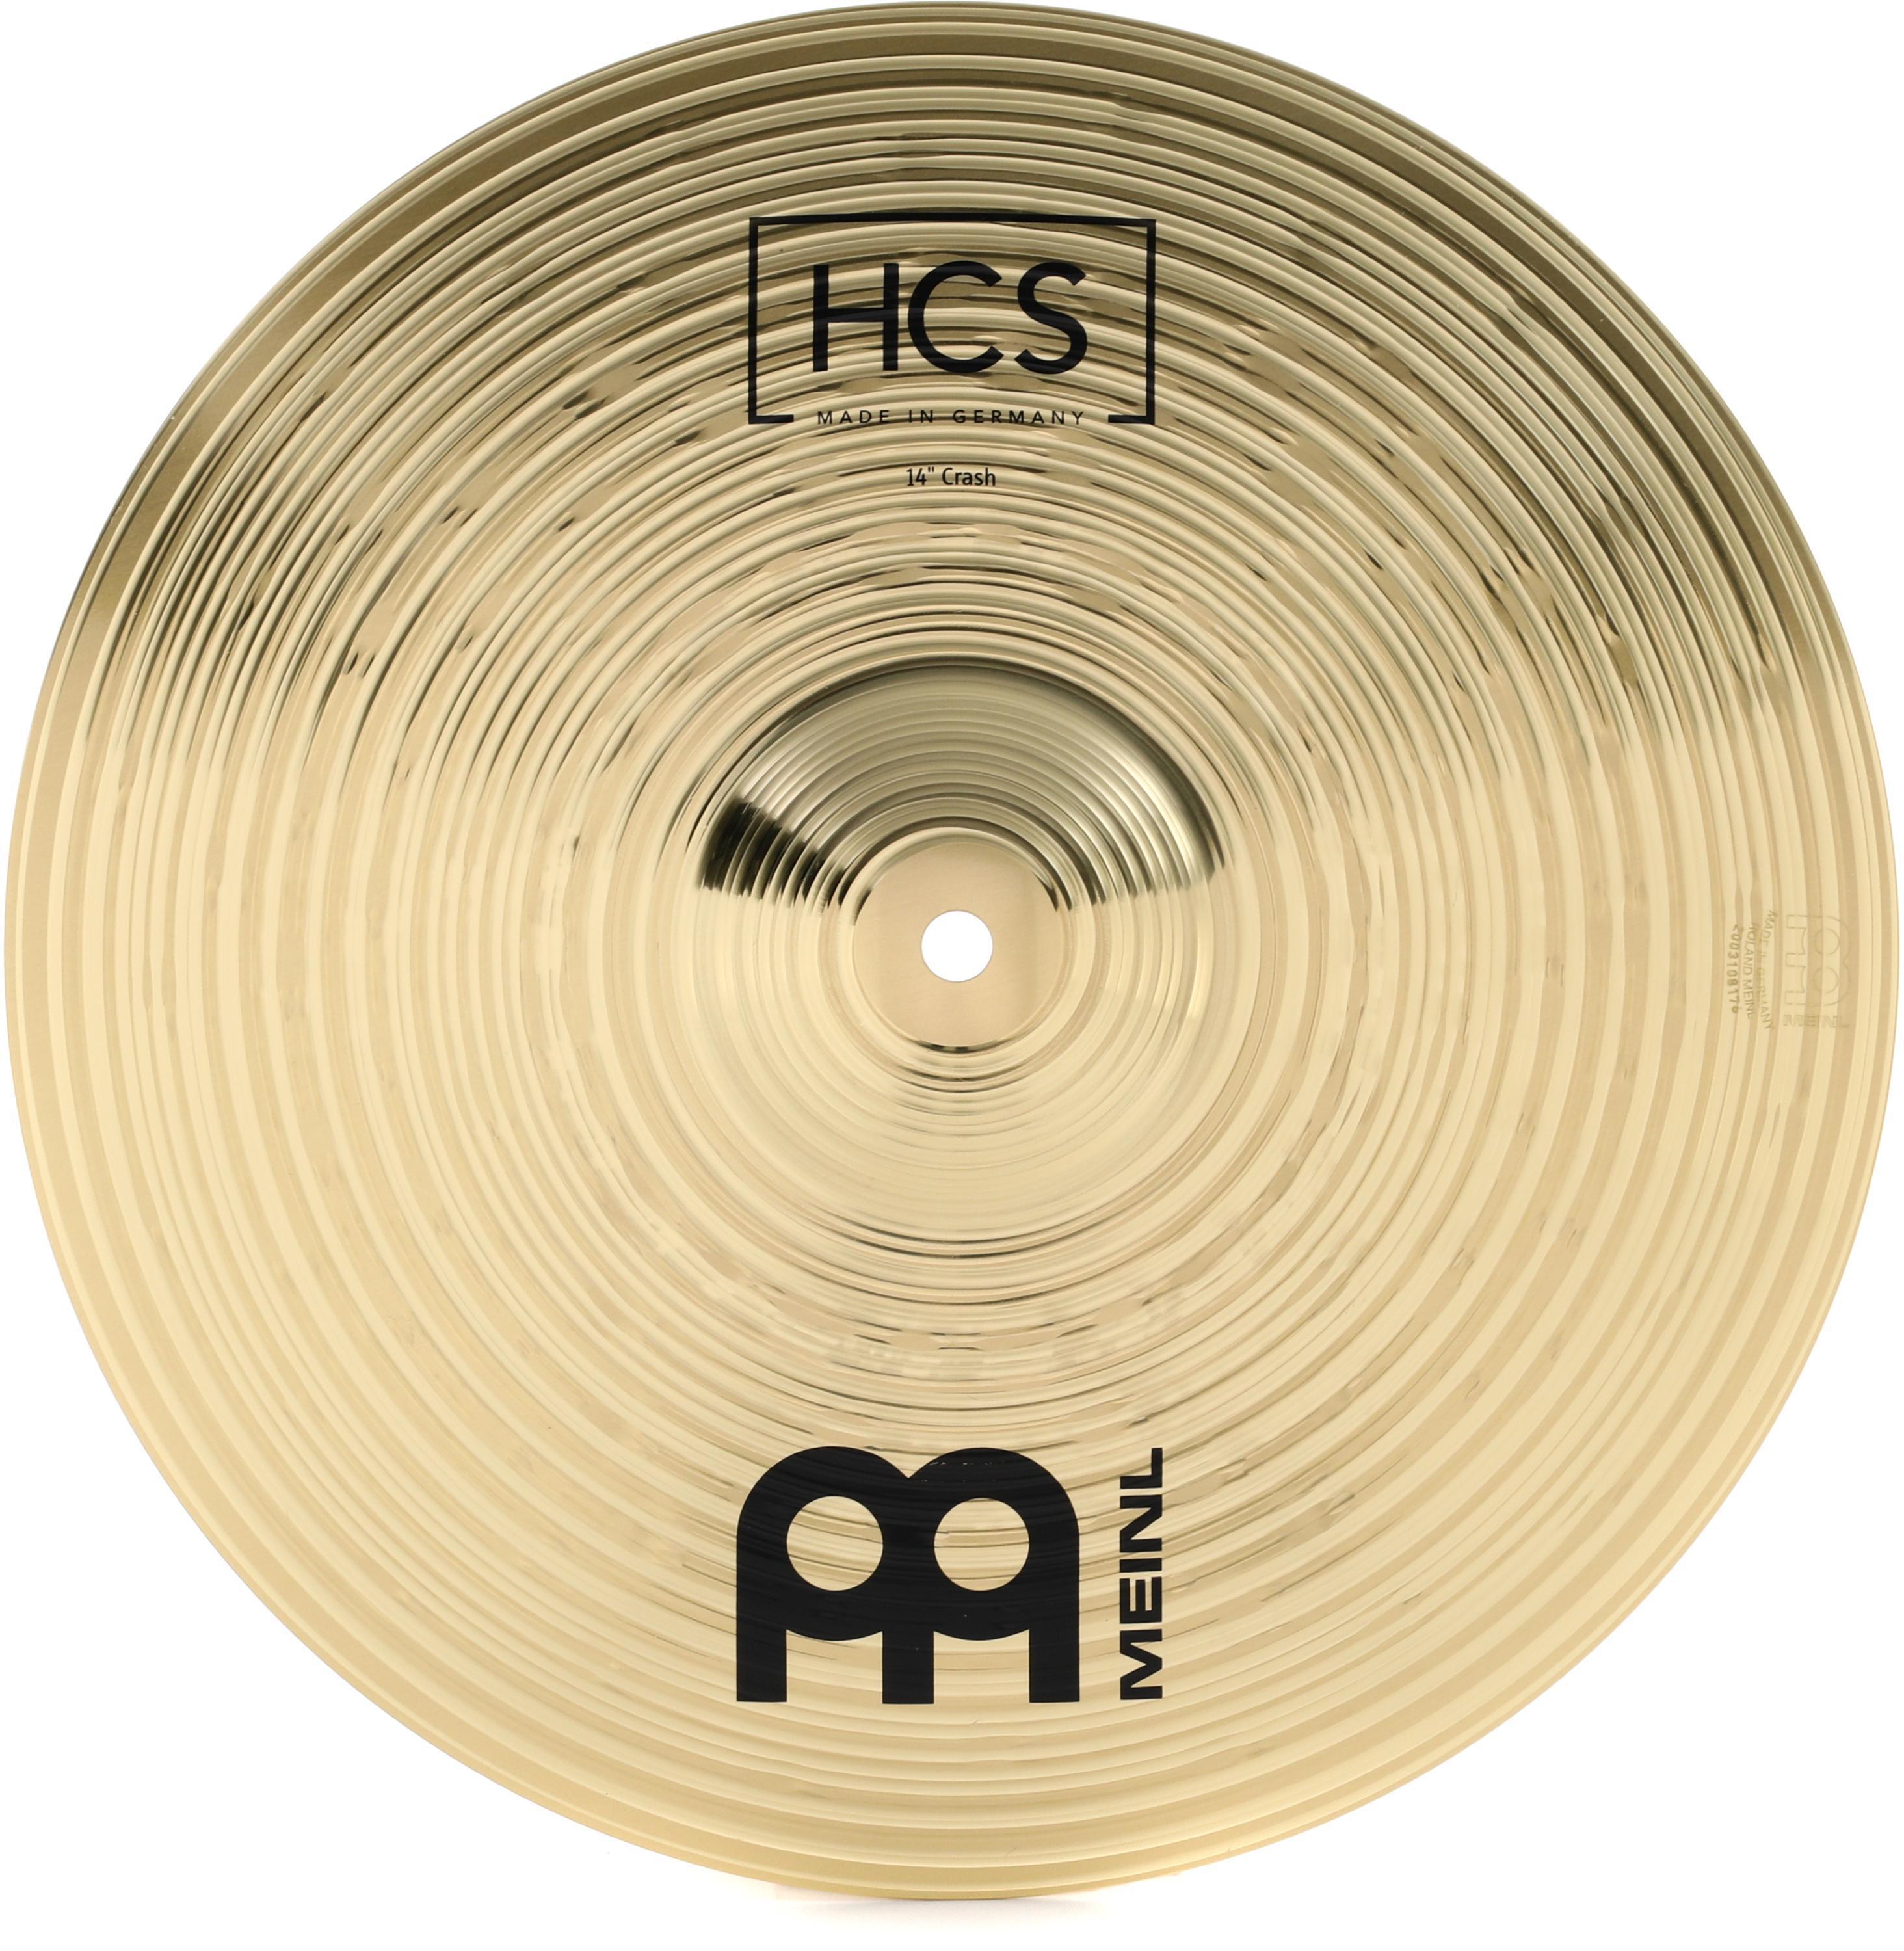  Meinl 20 Ride Cymbal - HCS Traditional Finish Brass